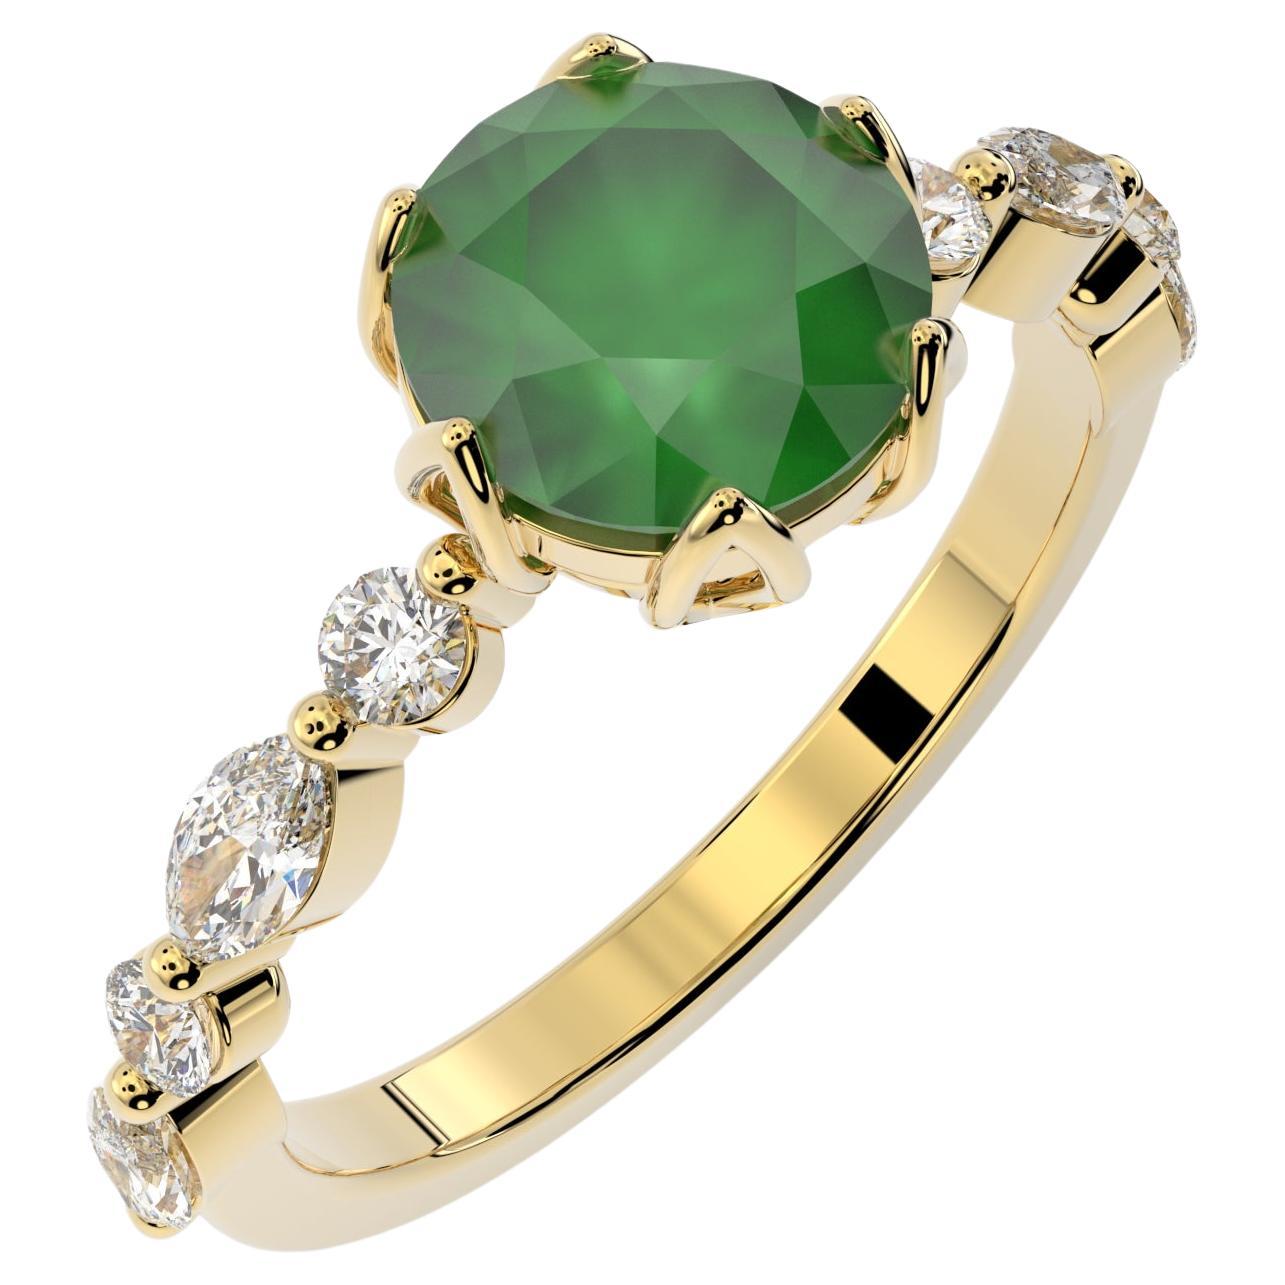 For Sale:  Green Emerald Engagement Ring with Round and Marquise Diamonds set in 18K gold